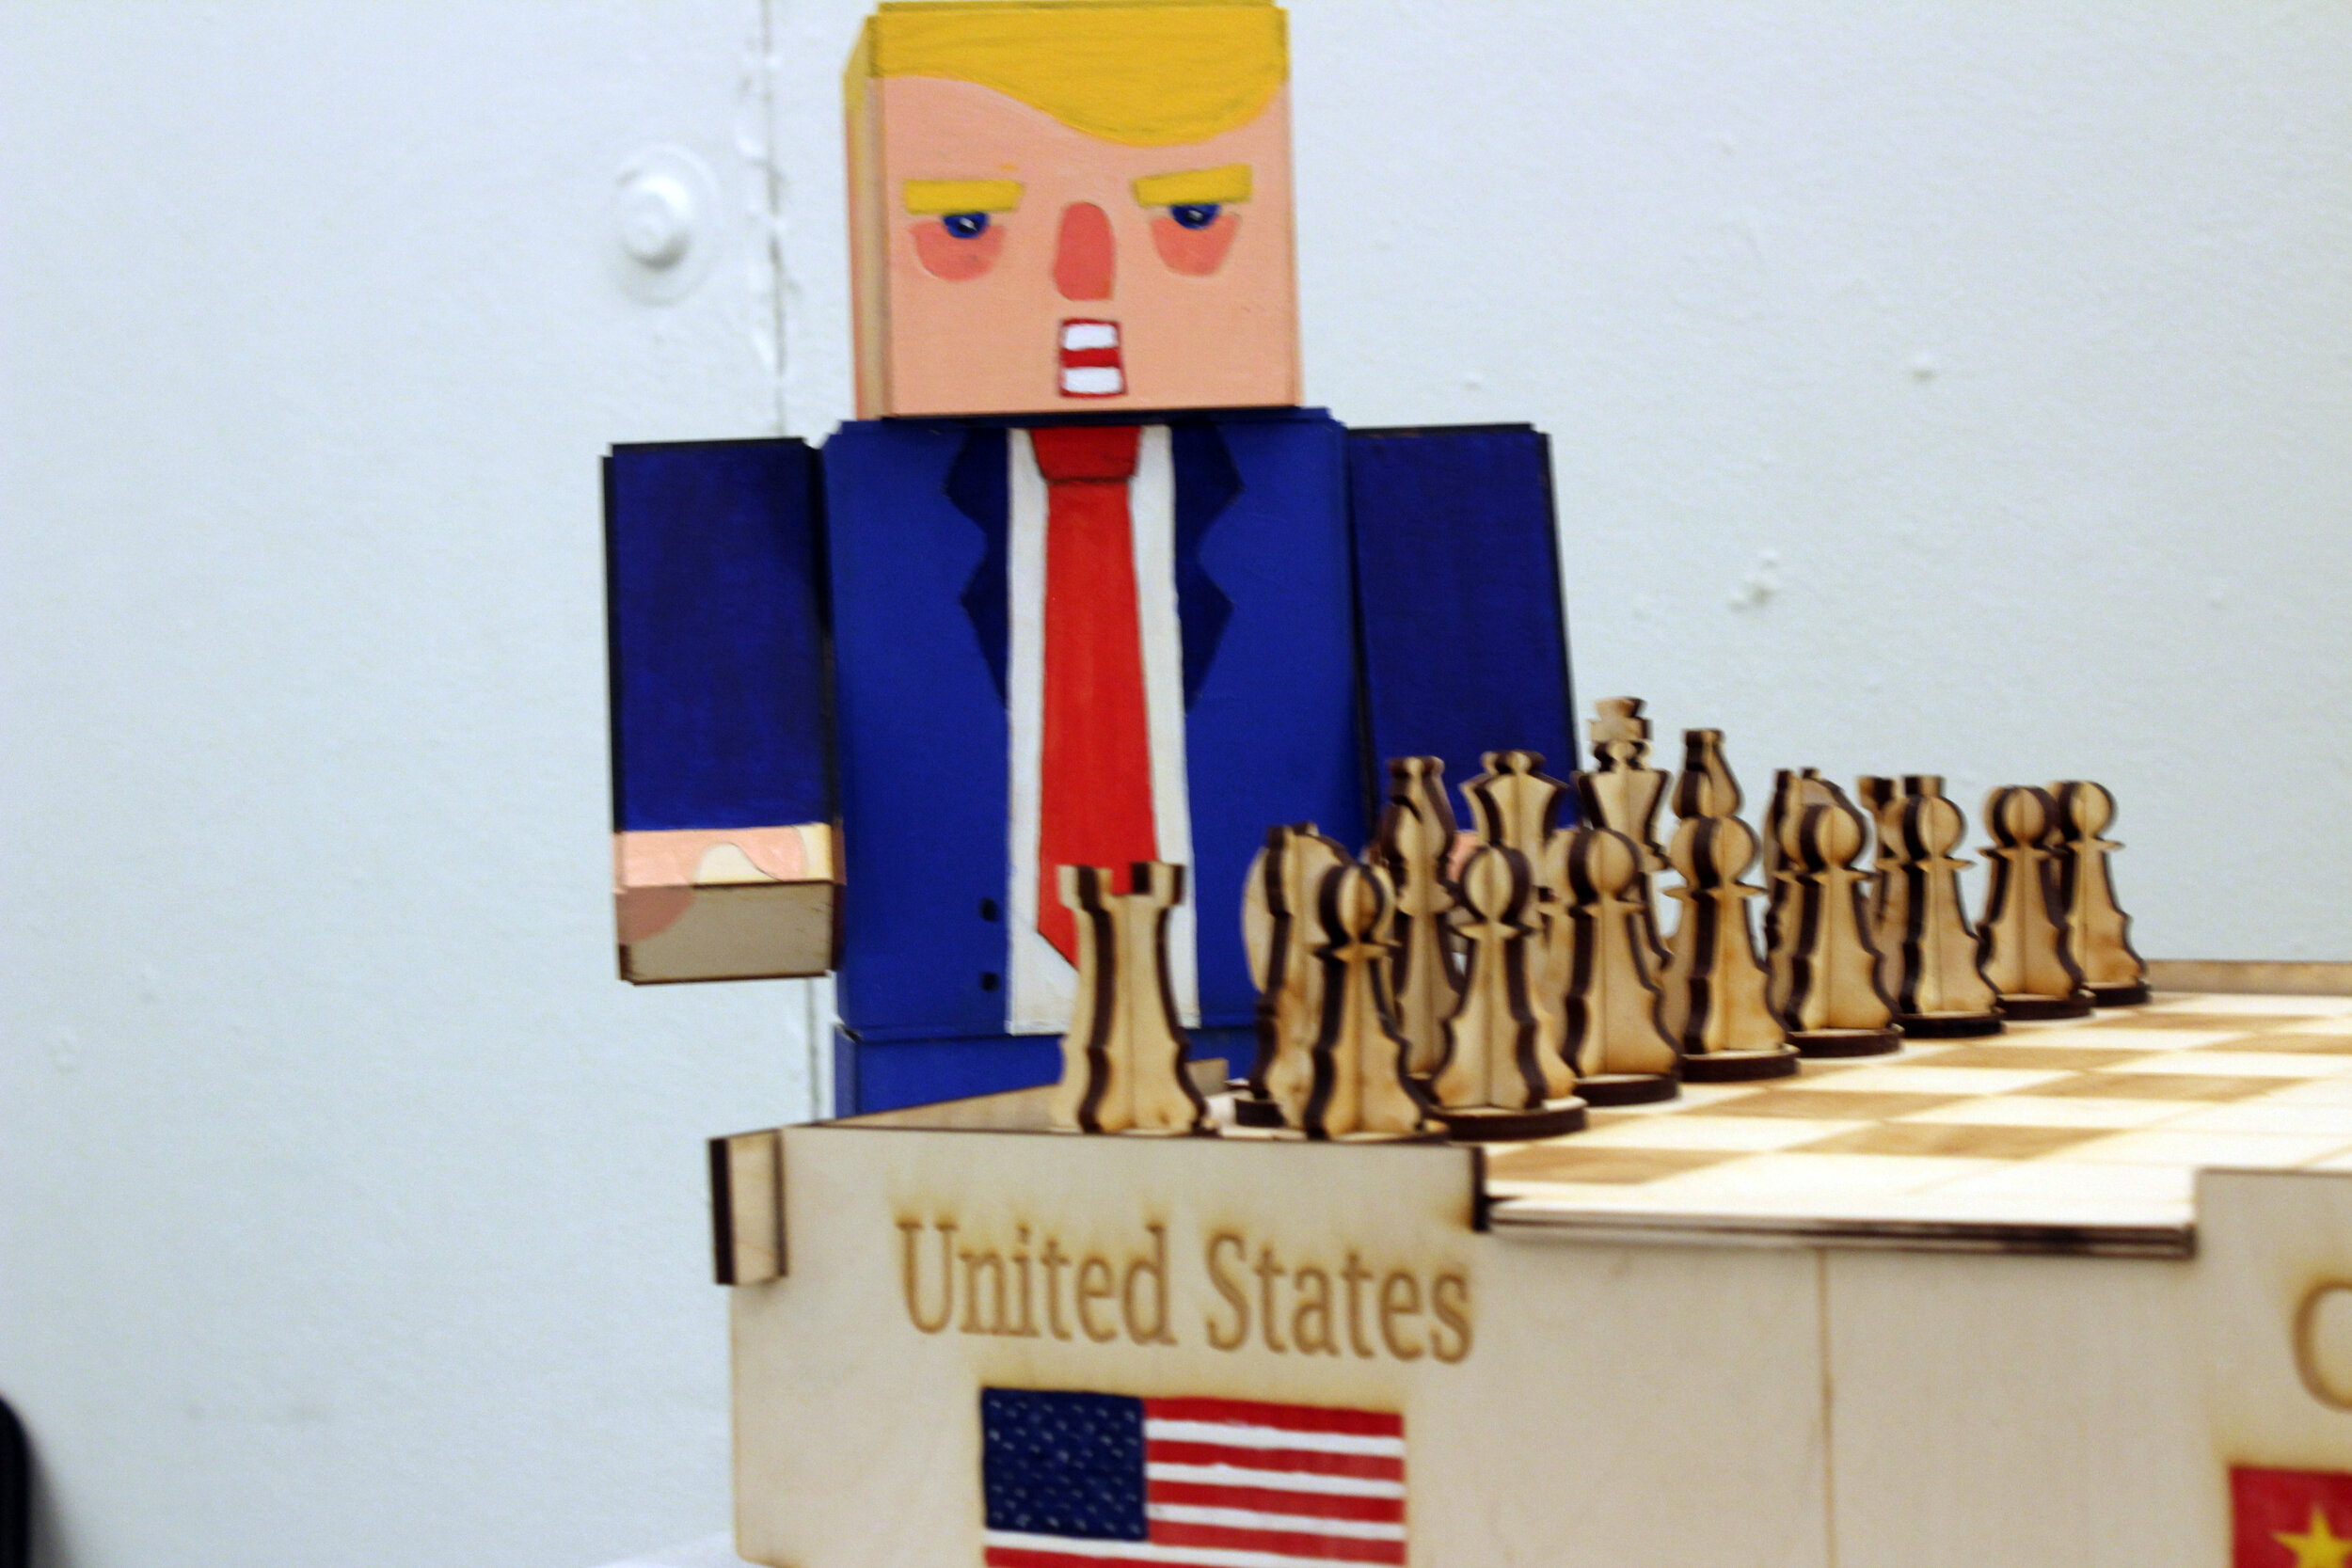 Zhongjie Cao, "Who is the Winner?" Plywood and acrylic, Chess box